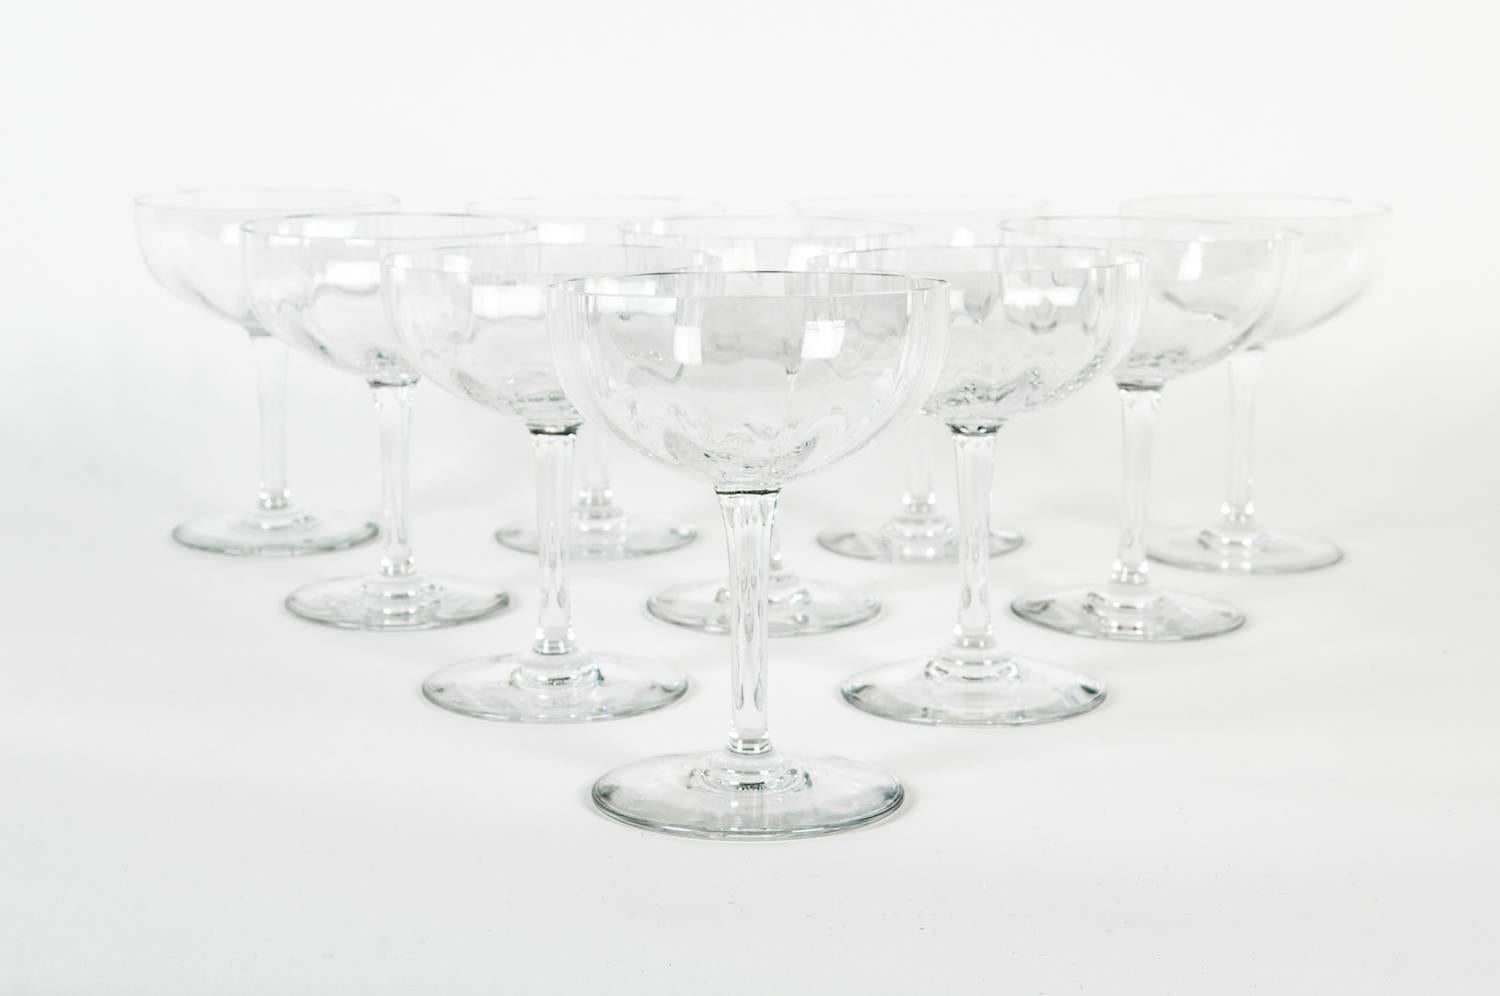 Set of ten vintage Baccarat acid-etched crystal champagne coupes. Maker's mark undersides. Excellent condition. Each coupe measure 5 inches high X 4 inches top diameter.